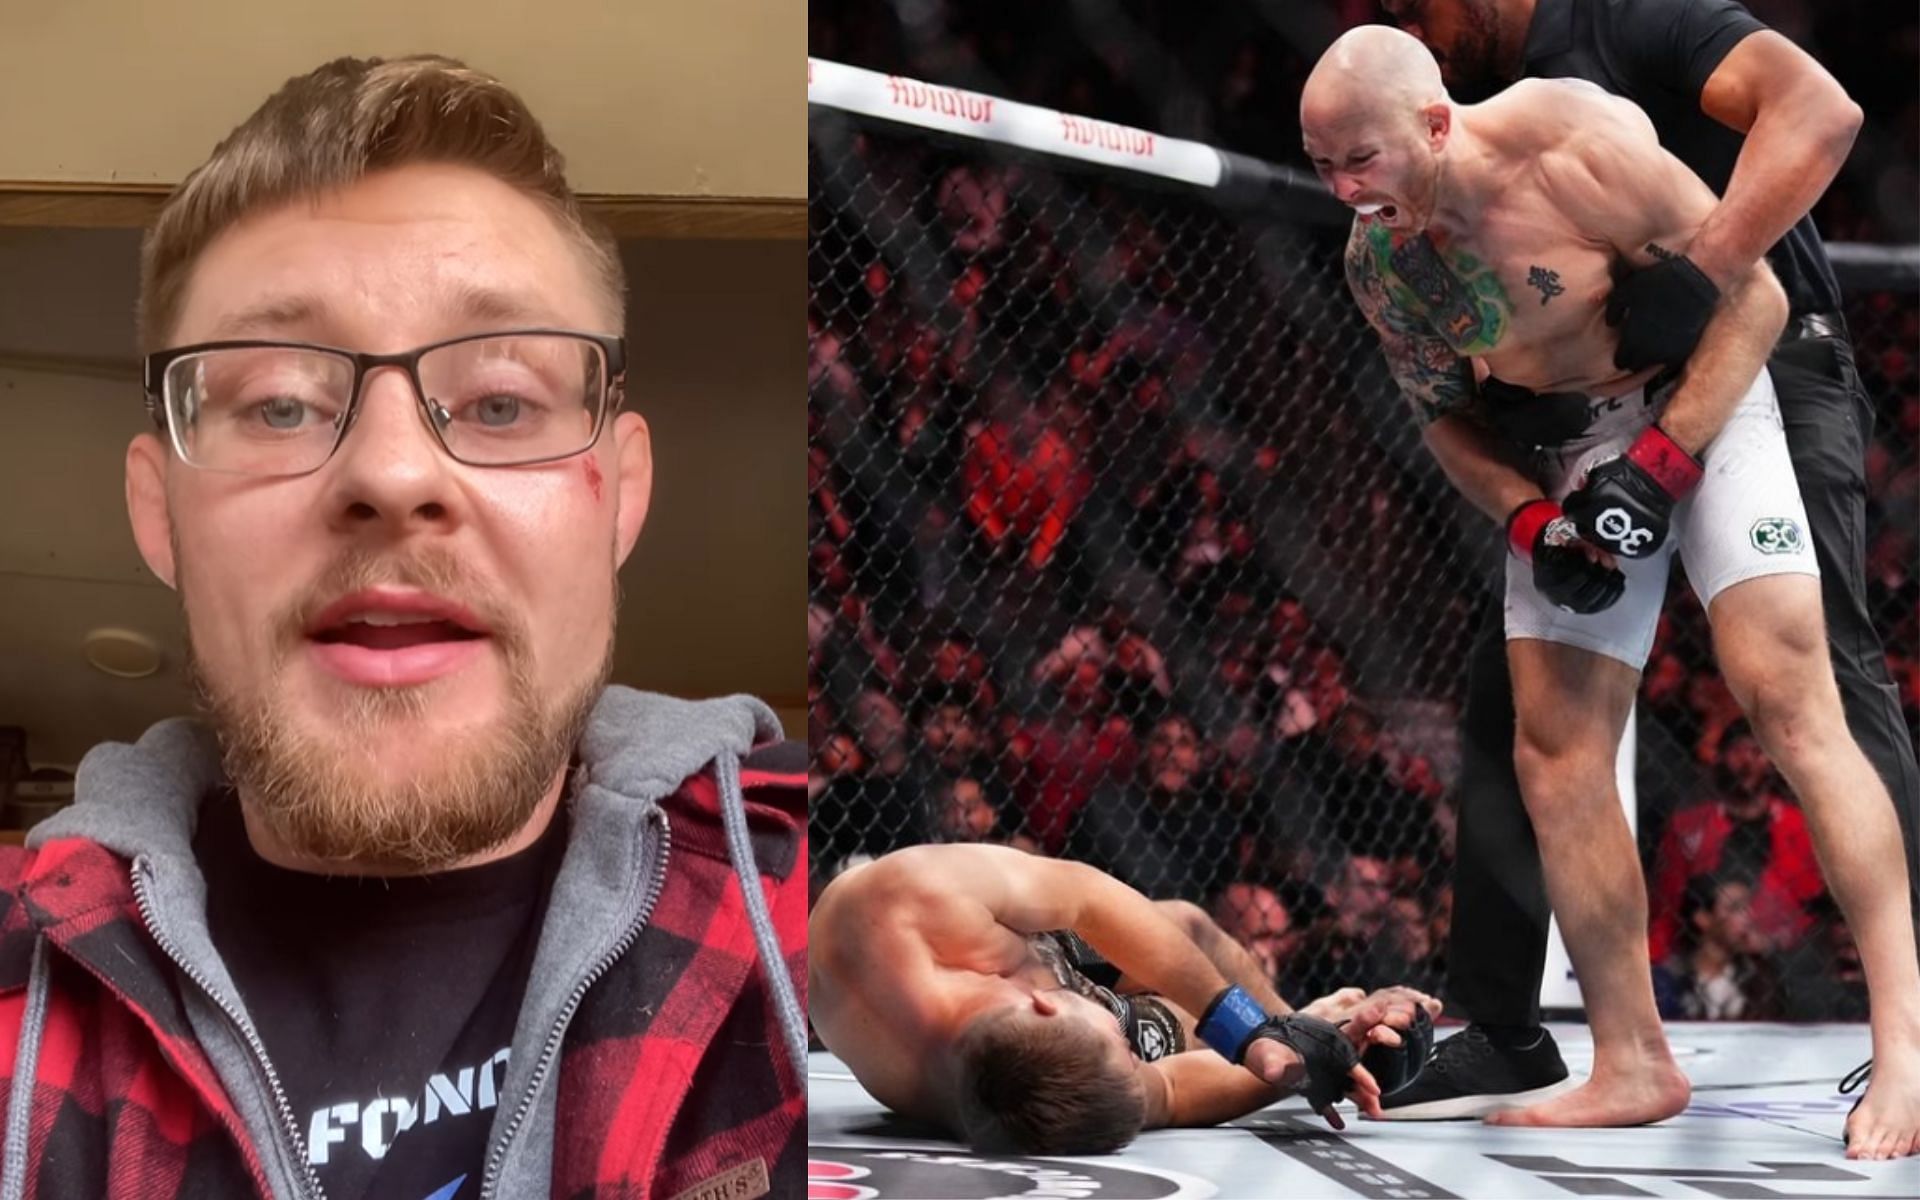 Bryce Mitchell (left) says his friends and family thought he had died after severe KO at UFC 296 against Josh Emmett (right) [Images Courtesy: @thugnasty_ufc and @joshemmettufc on Instagram]